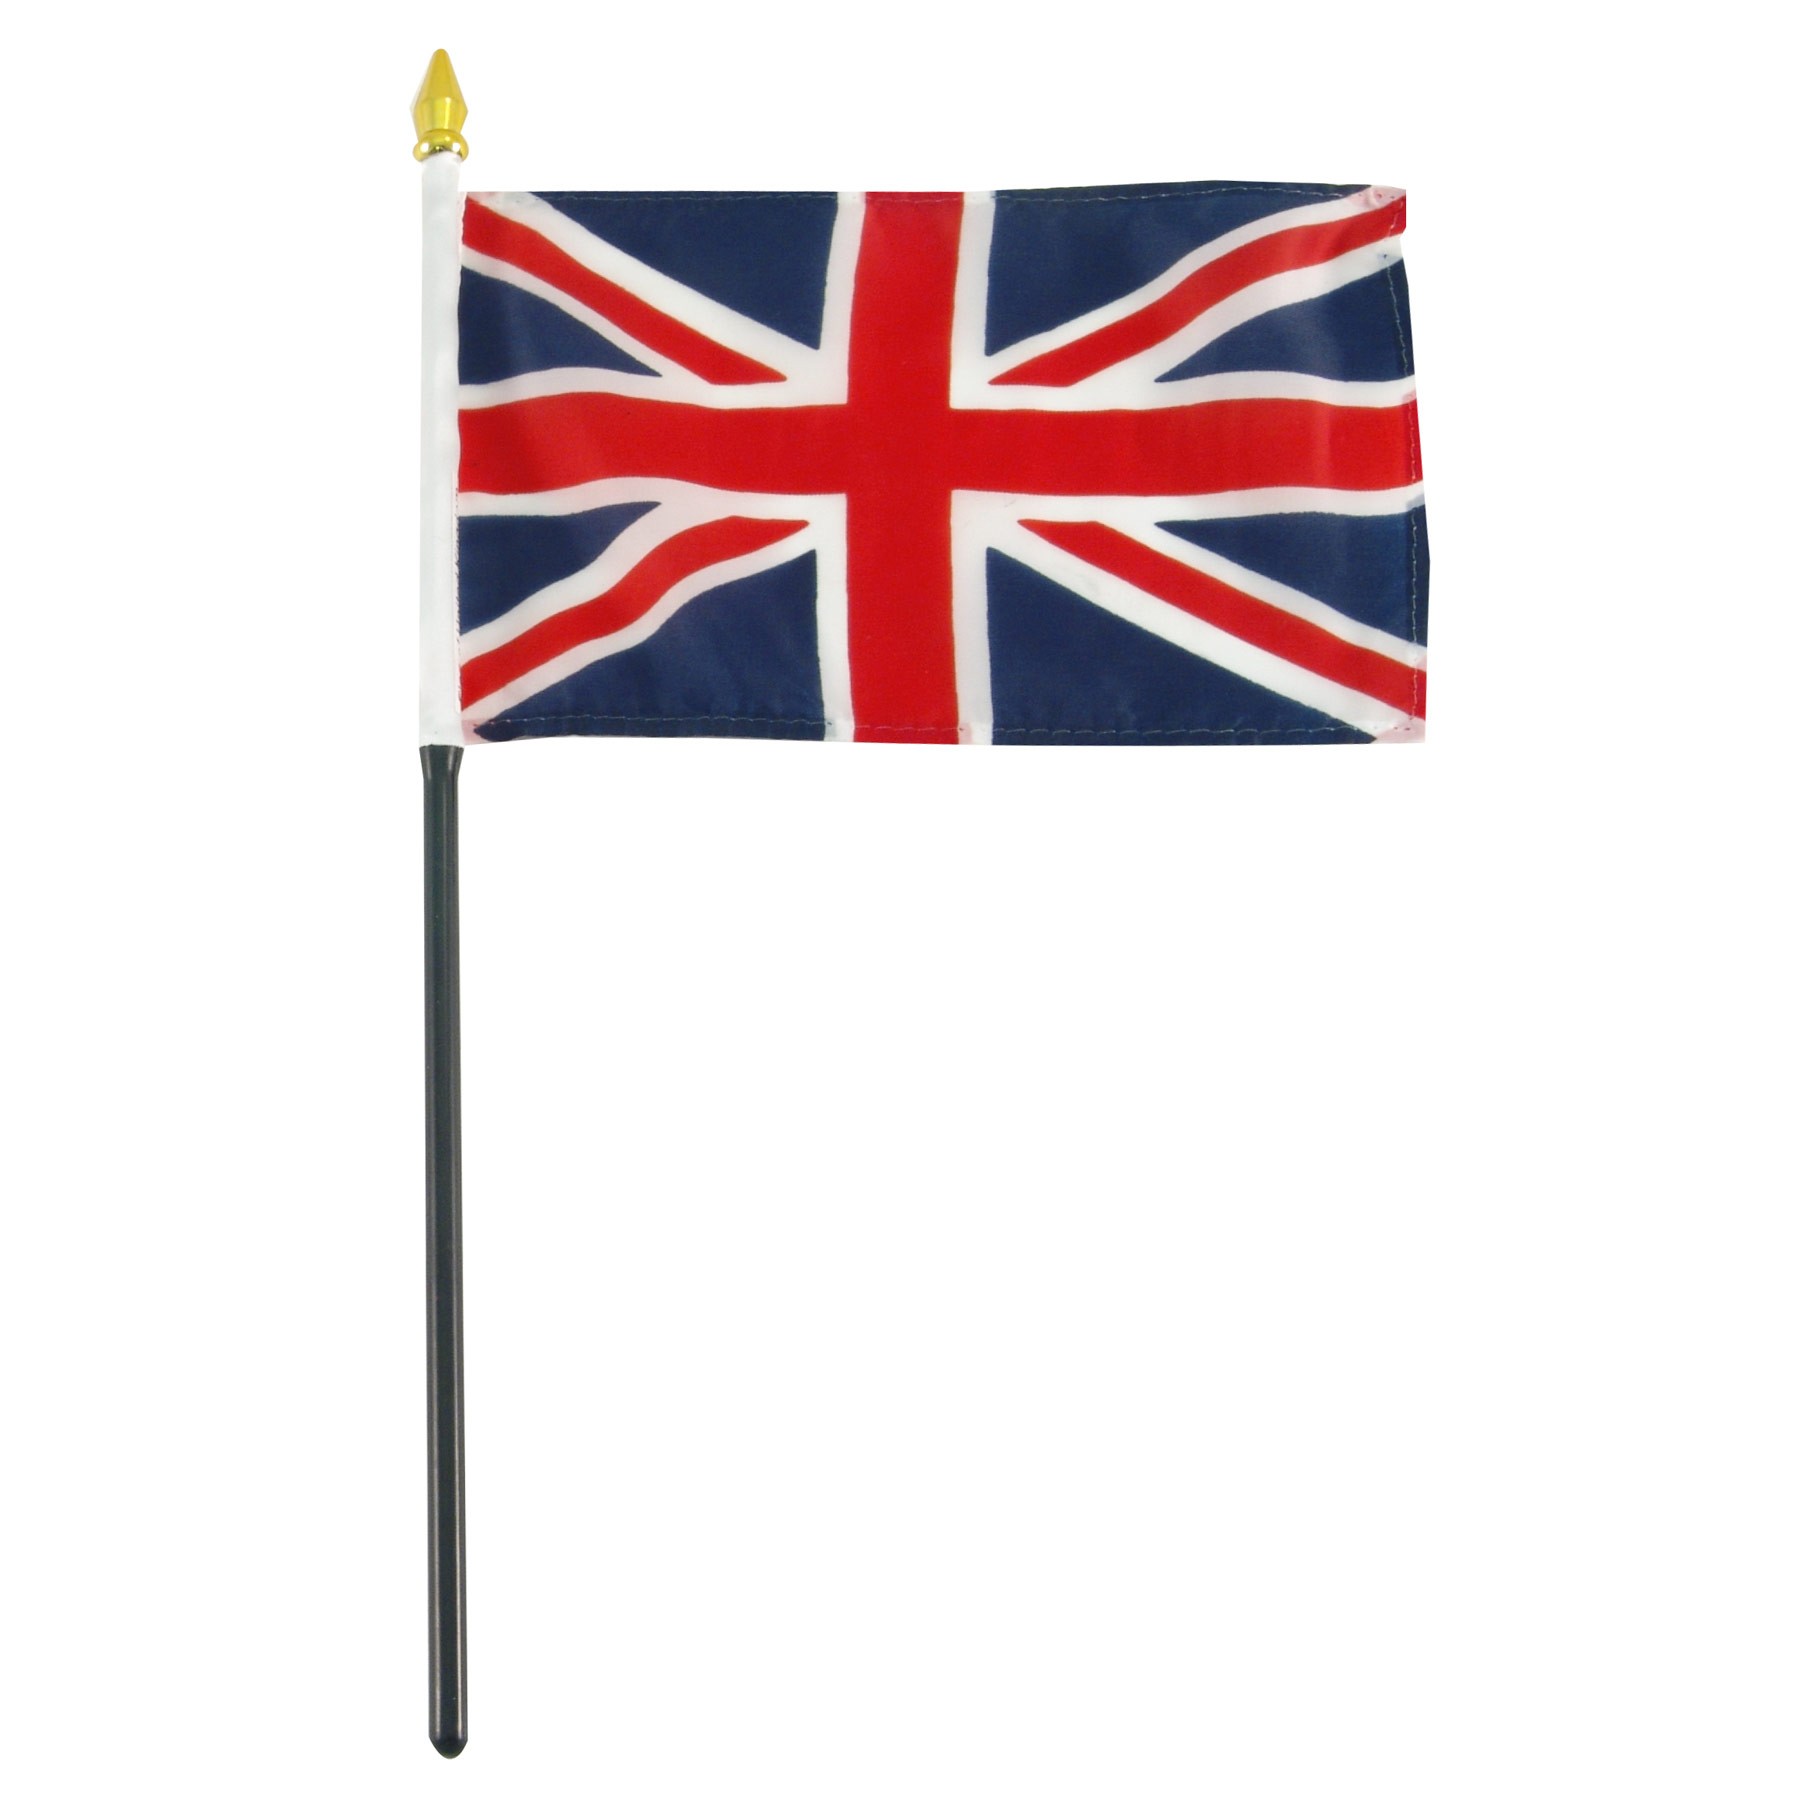 20 Images Of British Flag Free Cliparts That You Can Download To You